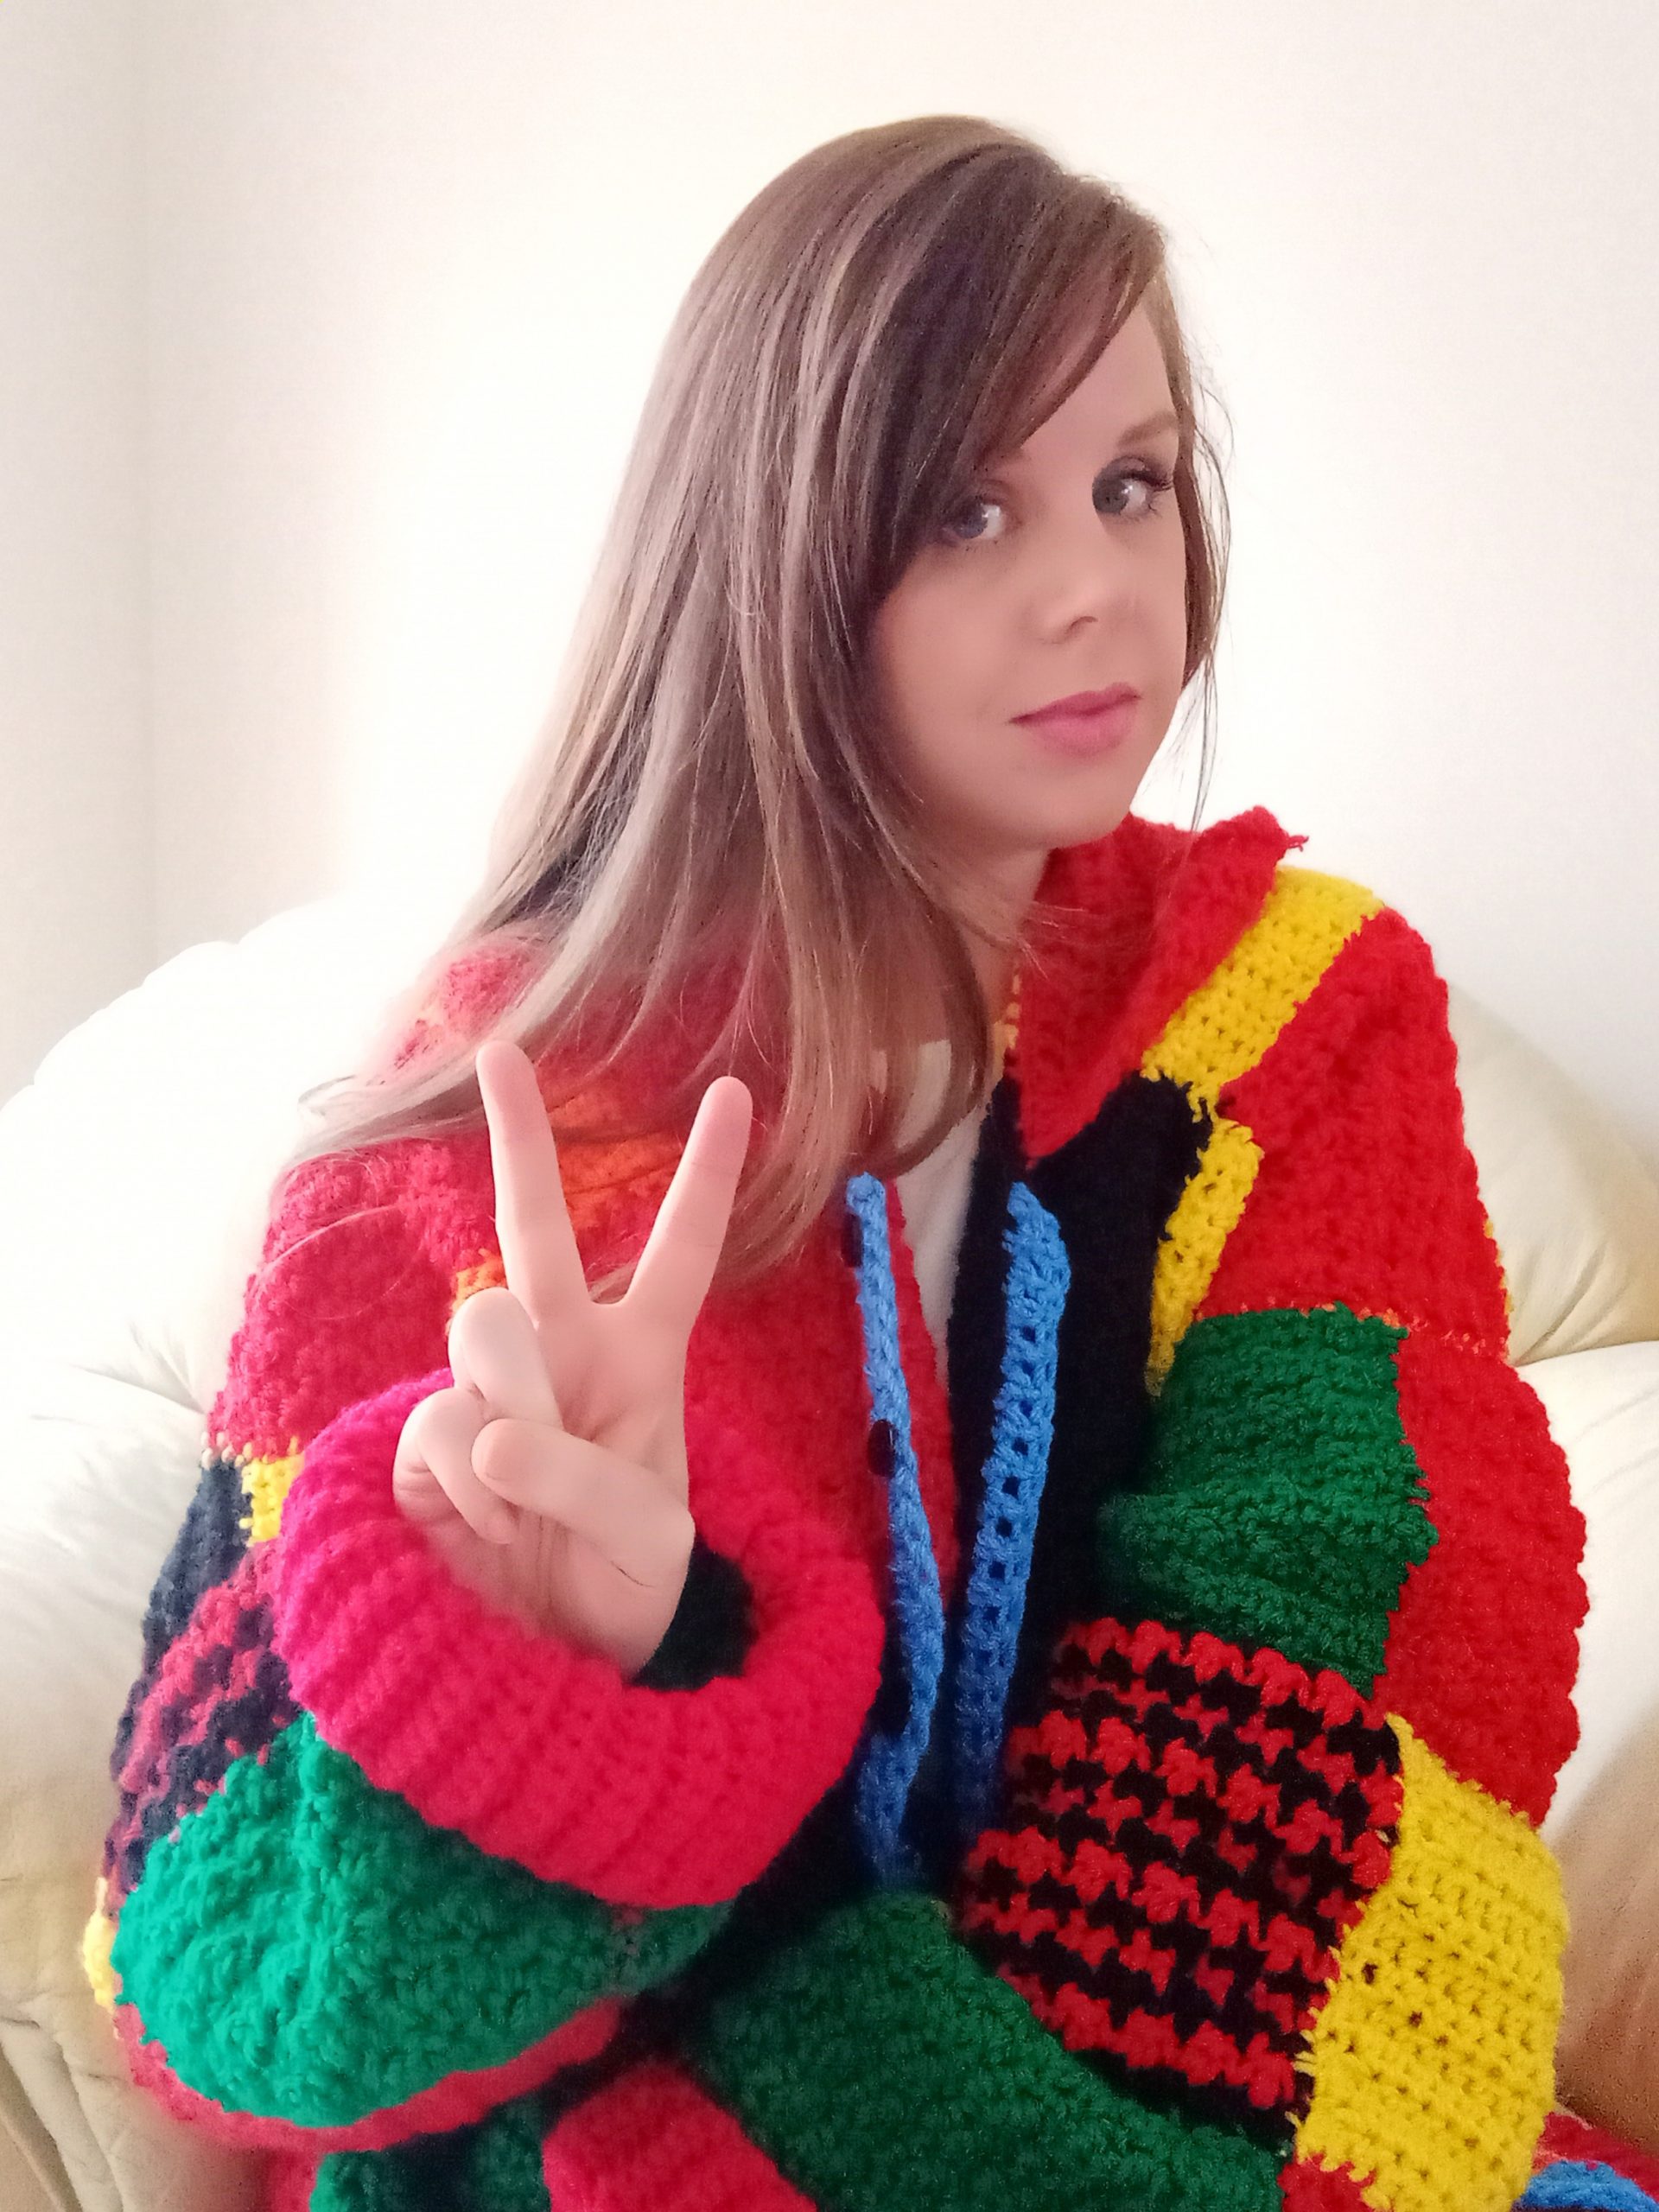 Crochet The Iconic Patchwork Cardigan by Selina Veronique